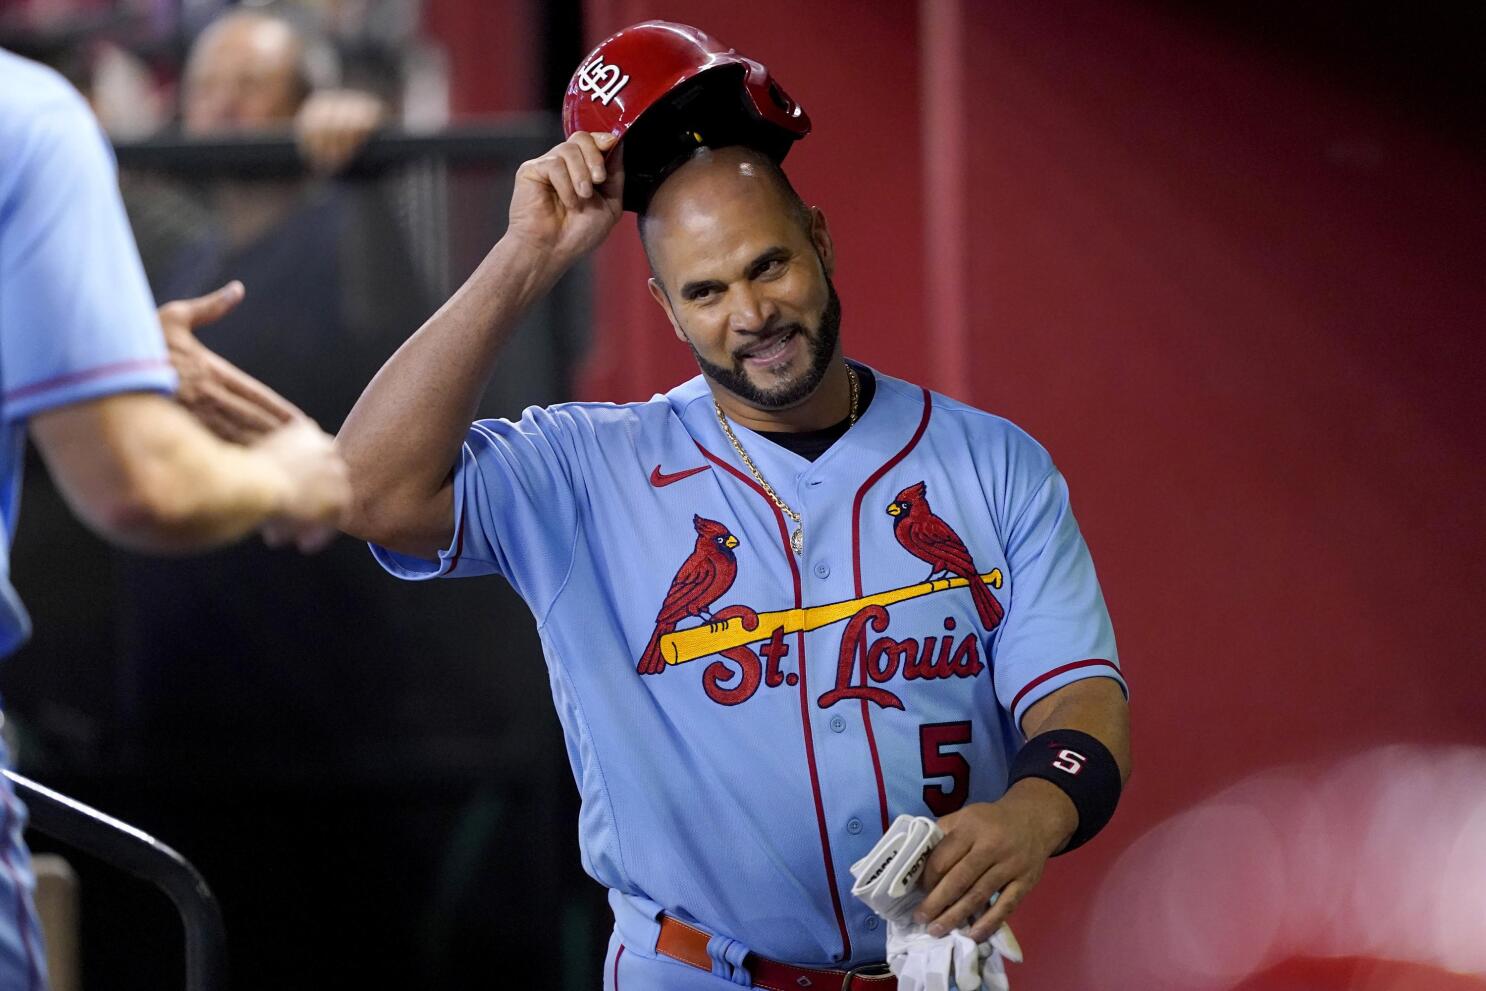 Cardinals split doubleheader with Nationals behind offense-heavy